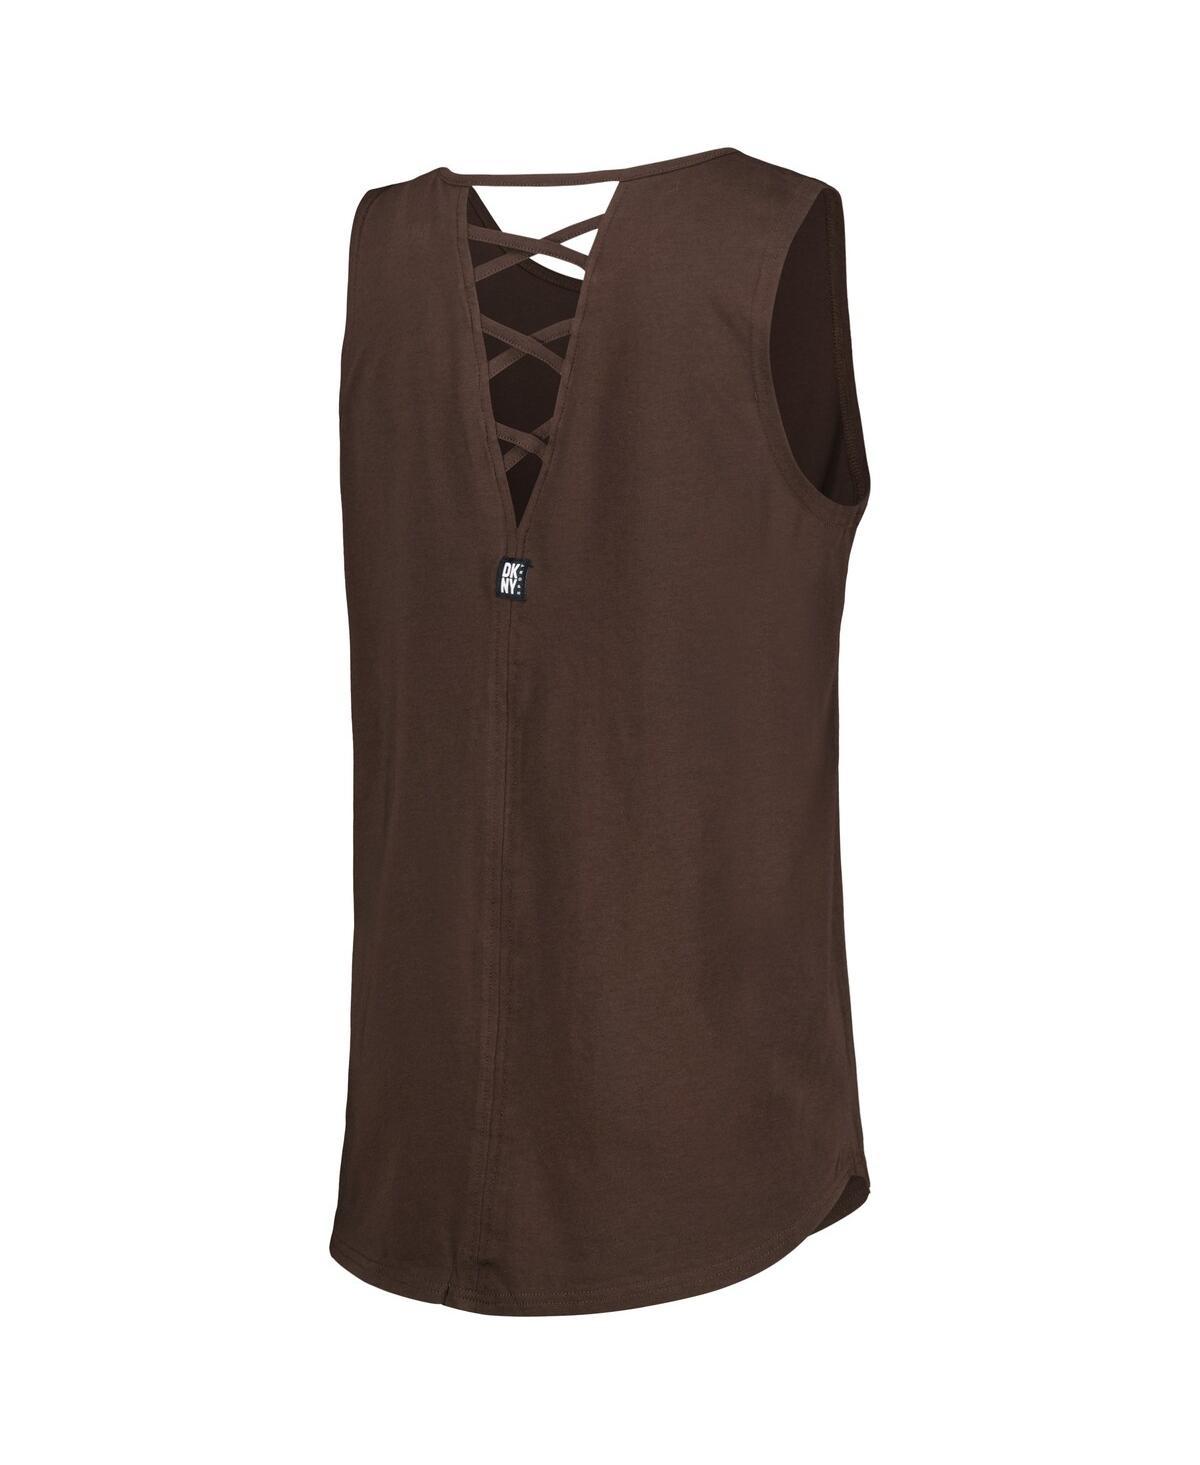 DKNY Sport San Diego Padres Claire Fashion Tri-blend Tank Top in